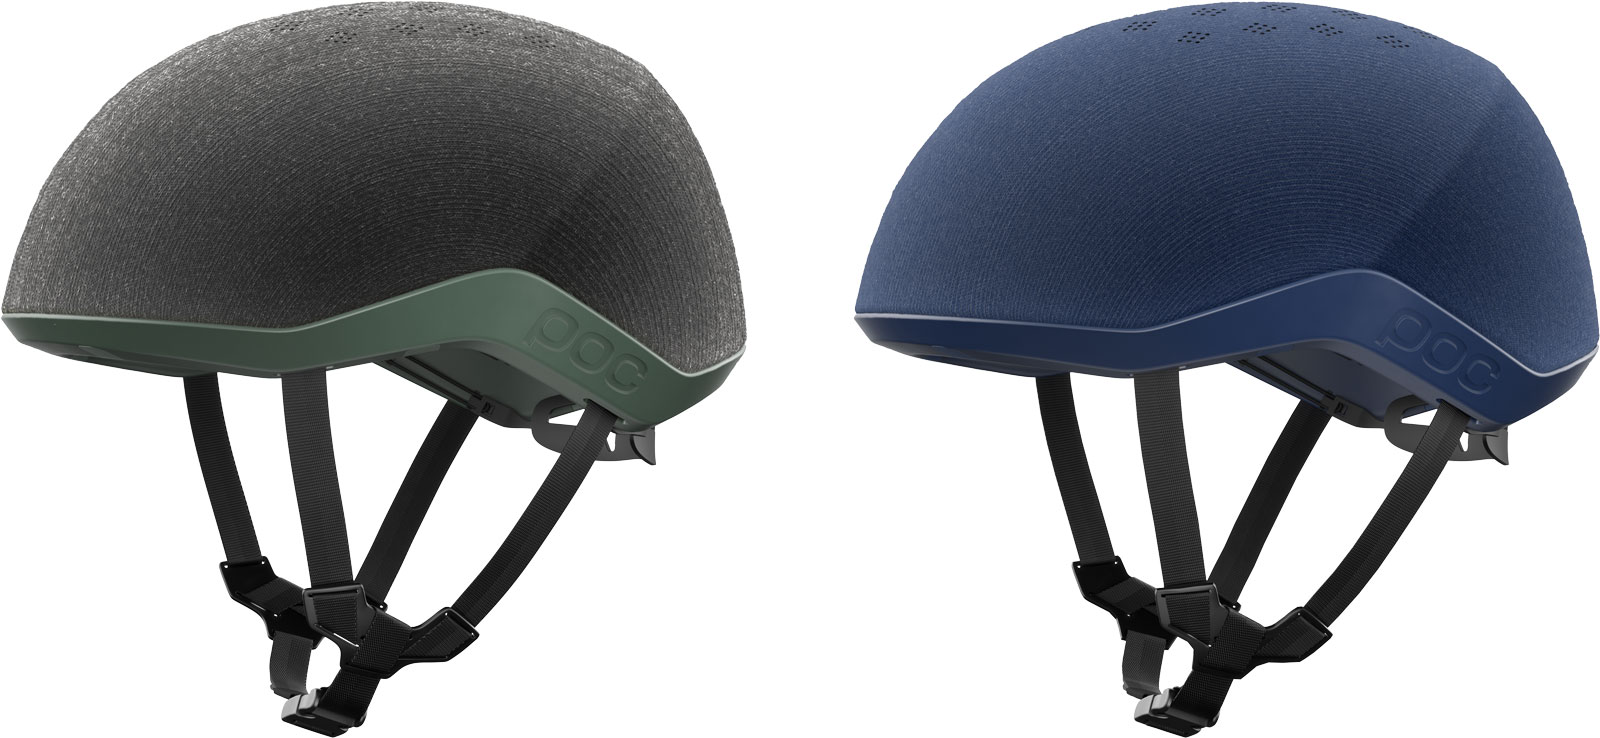 POC Myelin Helmet is made from 50% recycled materials